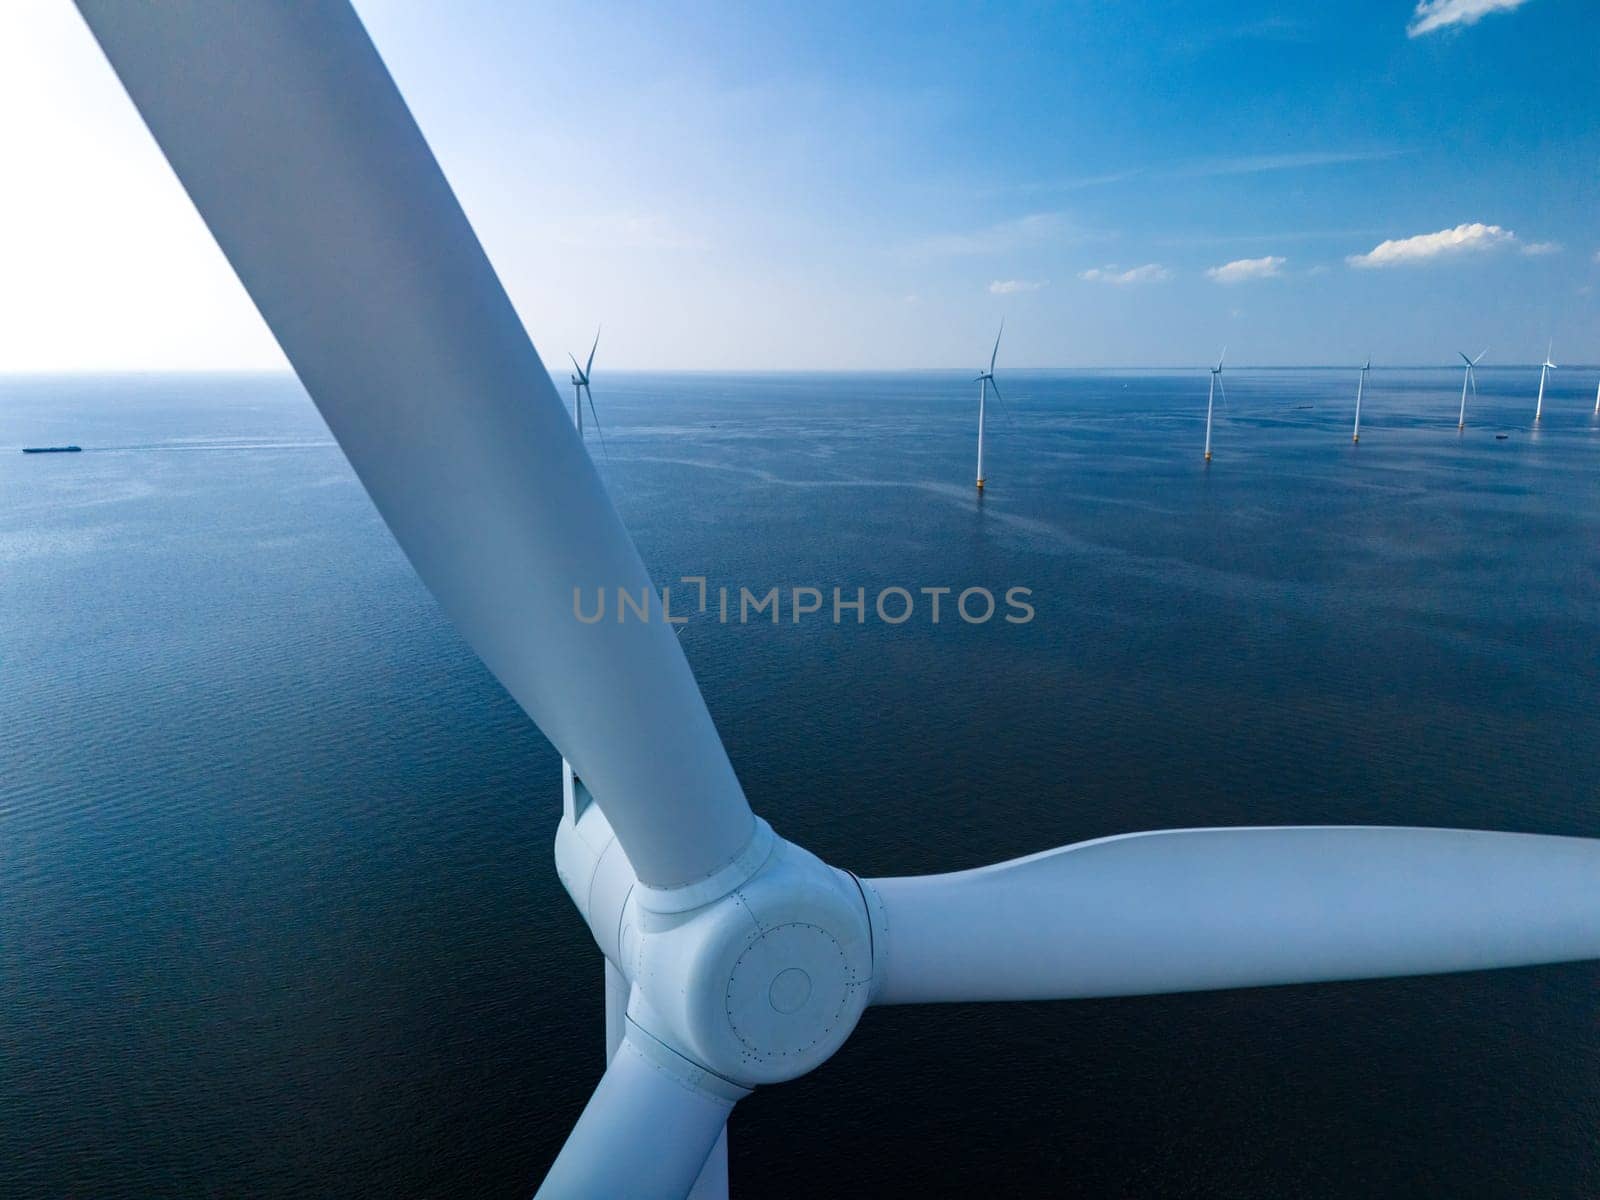 A breathtaking aerial view of a wind farm in the ocean, showcasing rows of towering windmill turbines generating renewable energy in the Netherlands Flevoland.